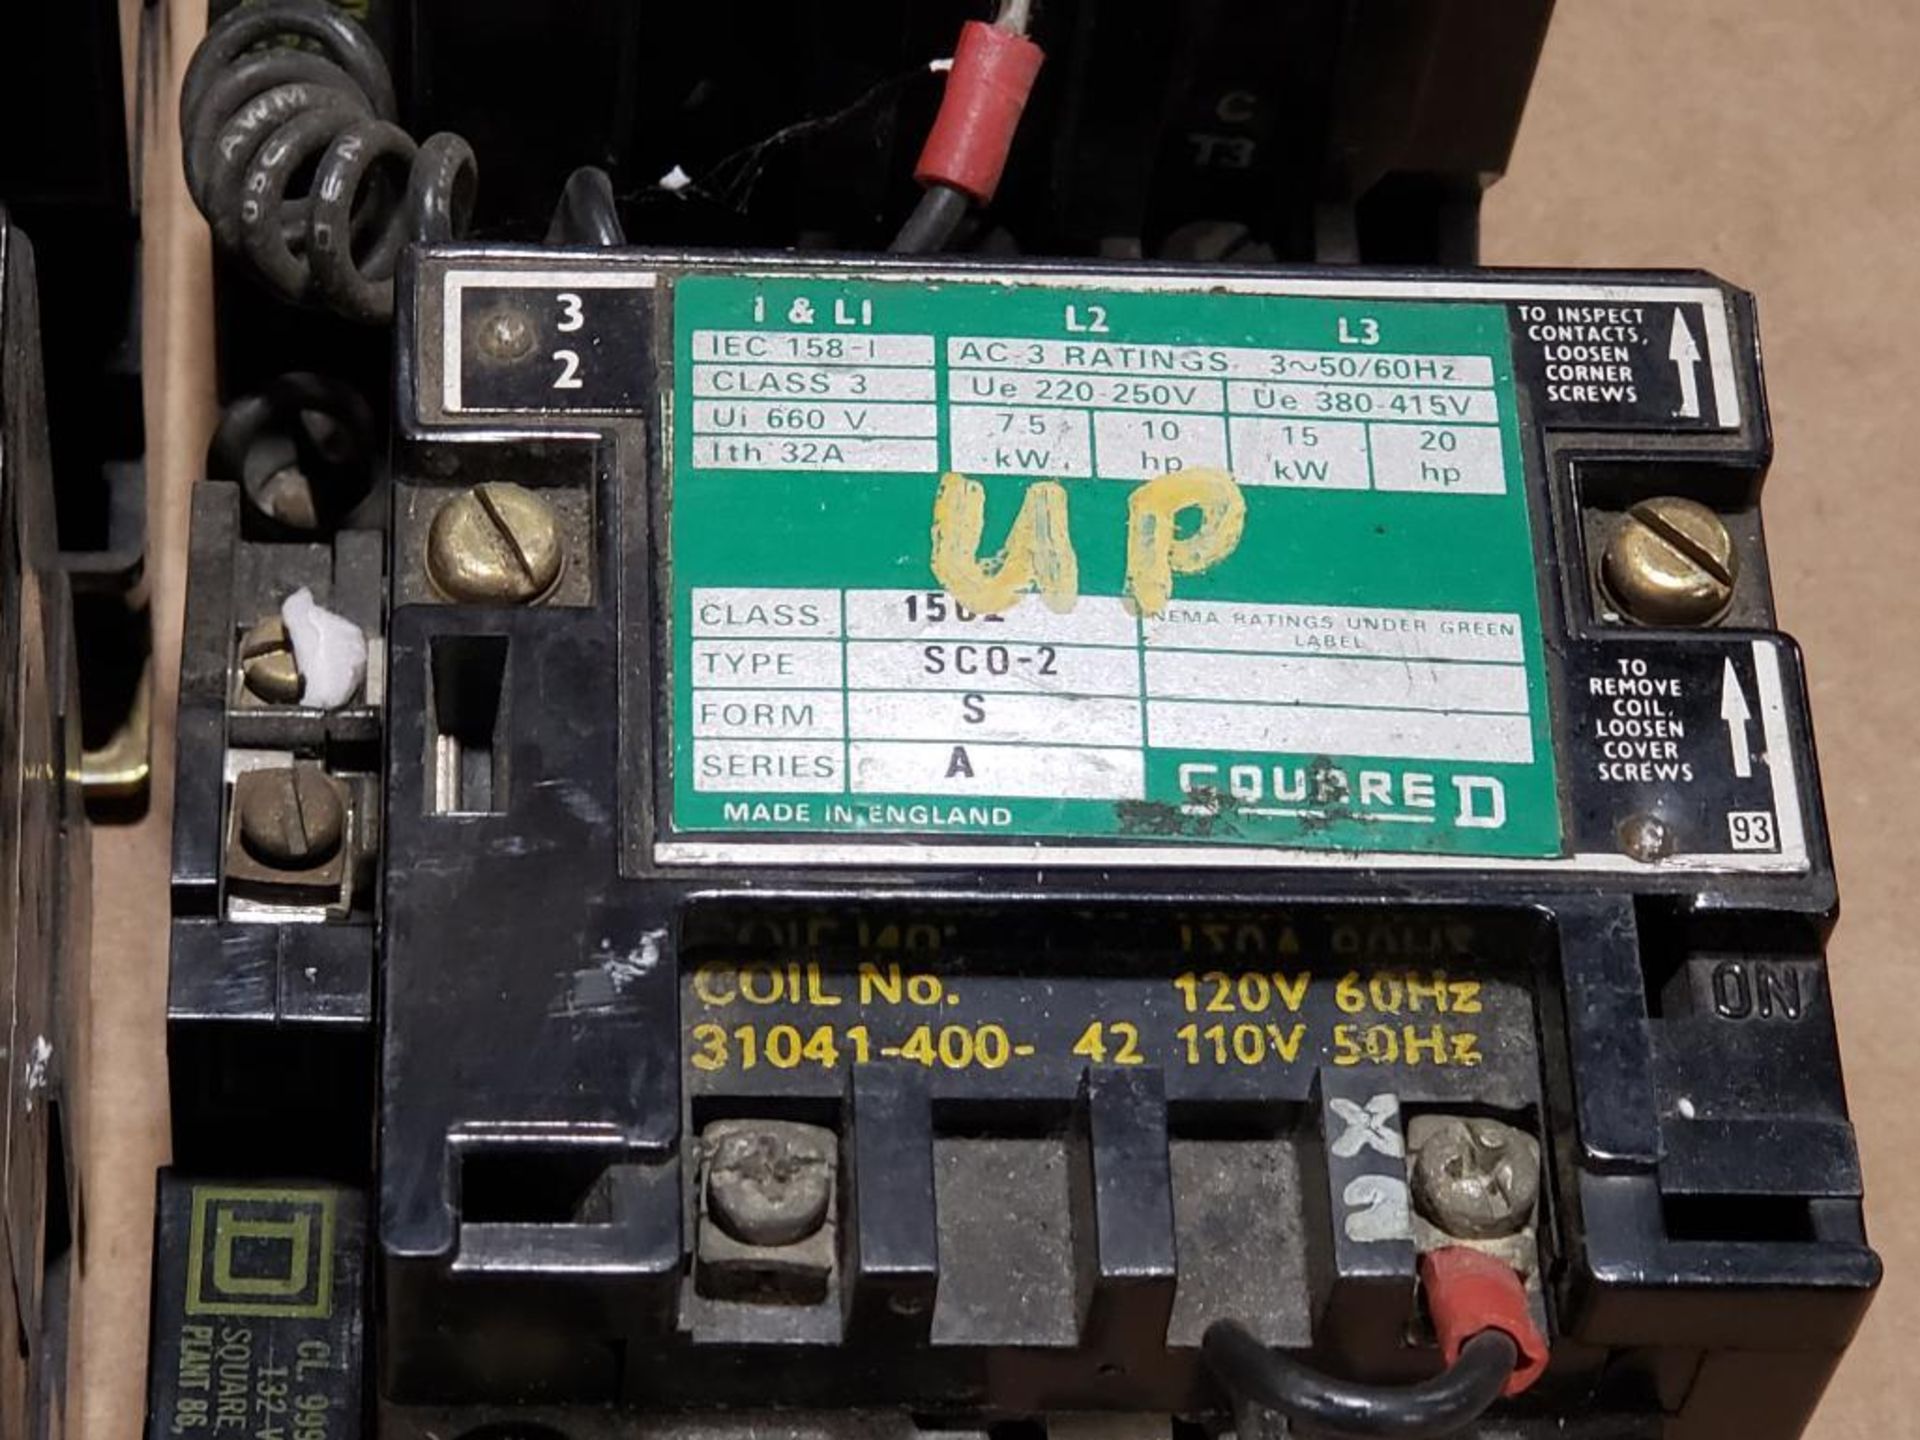 Qty 12 - Square D contactor. Class 1502 type SCO-2. - Image 13 of 14